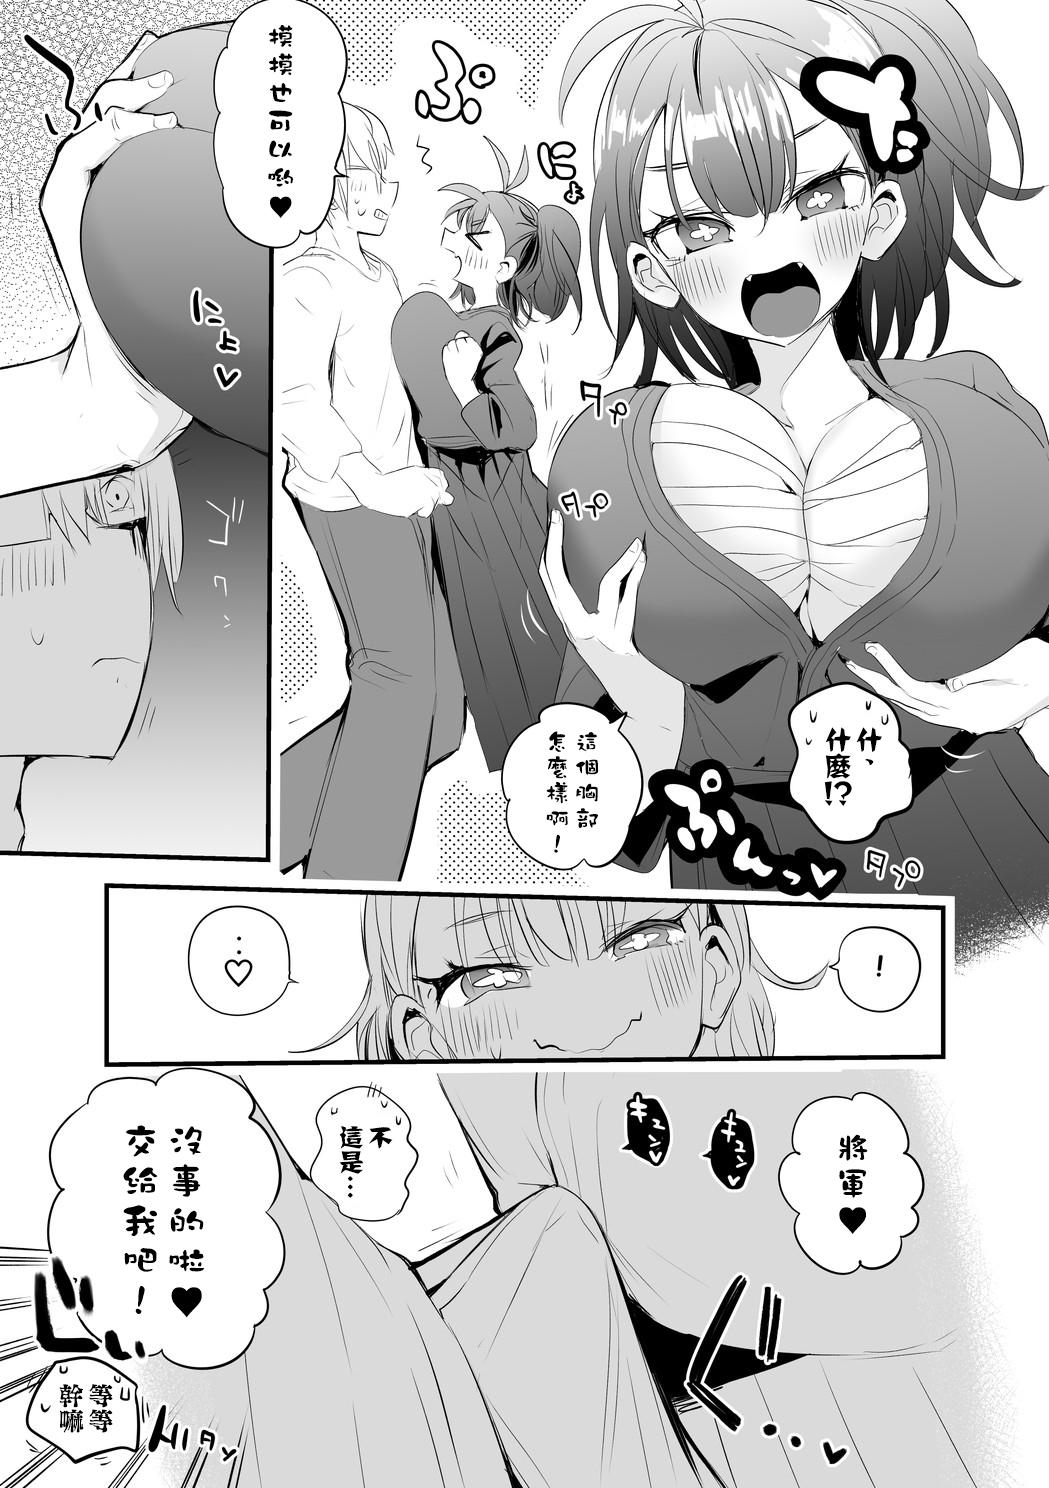 Beurette 恋するフィギュア Best Blowjob Ever - Page 4